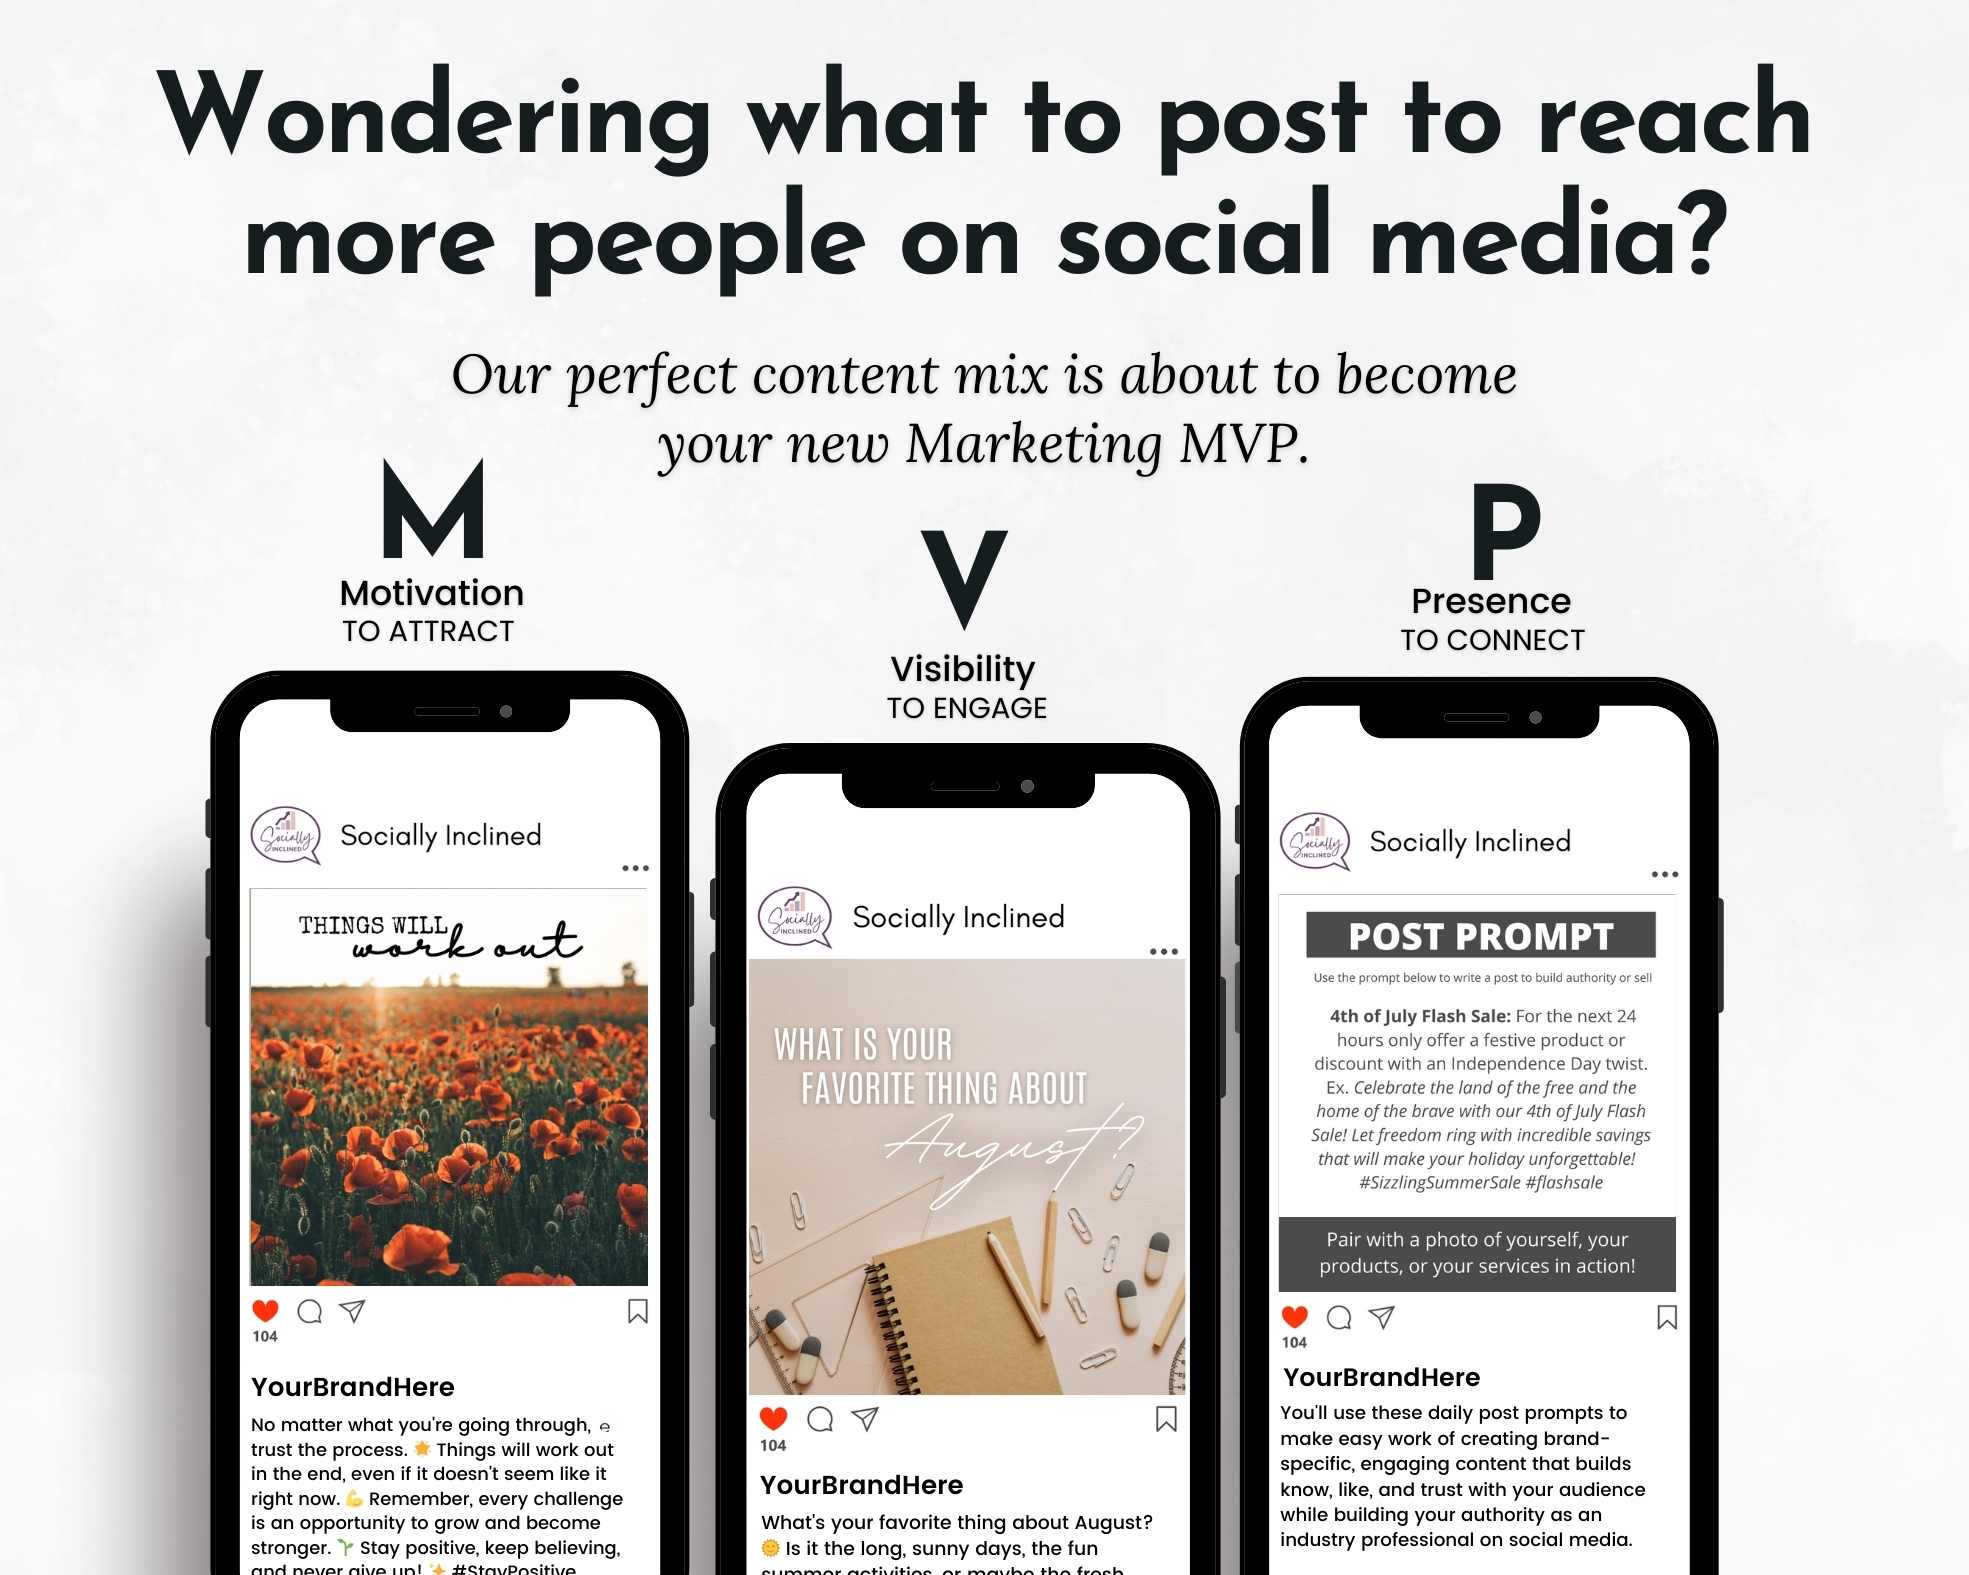 Three smartphones display social media posts demonstrating a content mix strategy labeled MVP: Motivation to attract, Visibility to engage, and Presence to connect. This aligns perfectly with our AUGUST Daily Posting Plan - Your Social Plan by Get Socially Inclined, ensuring a robust daily social media presence.